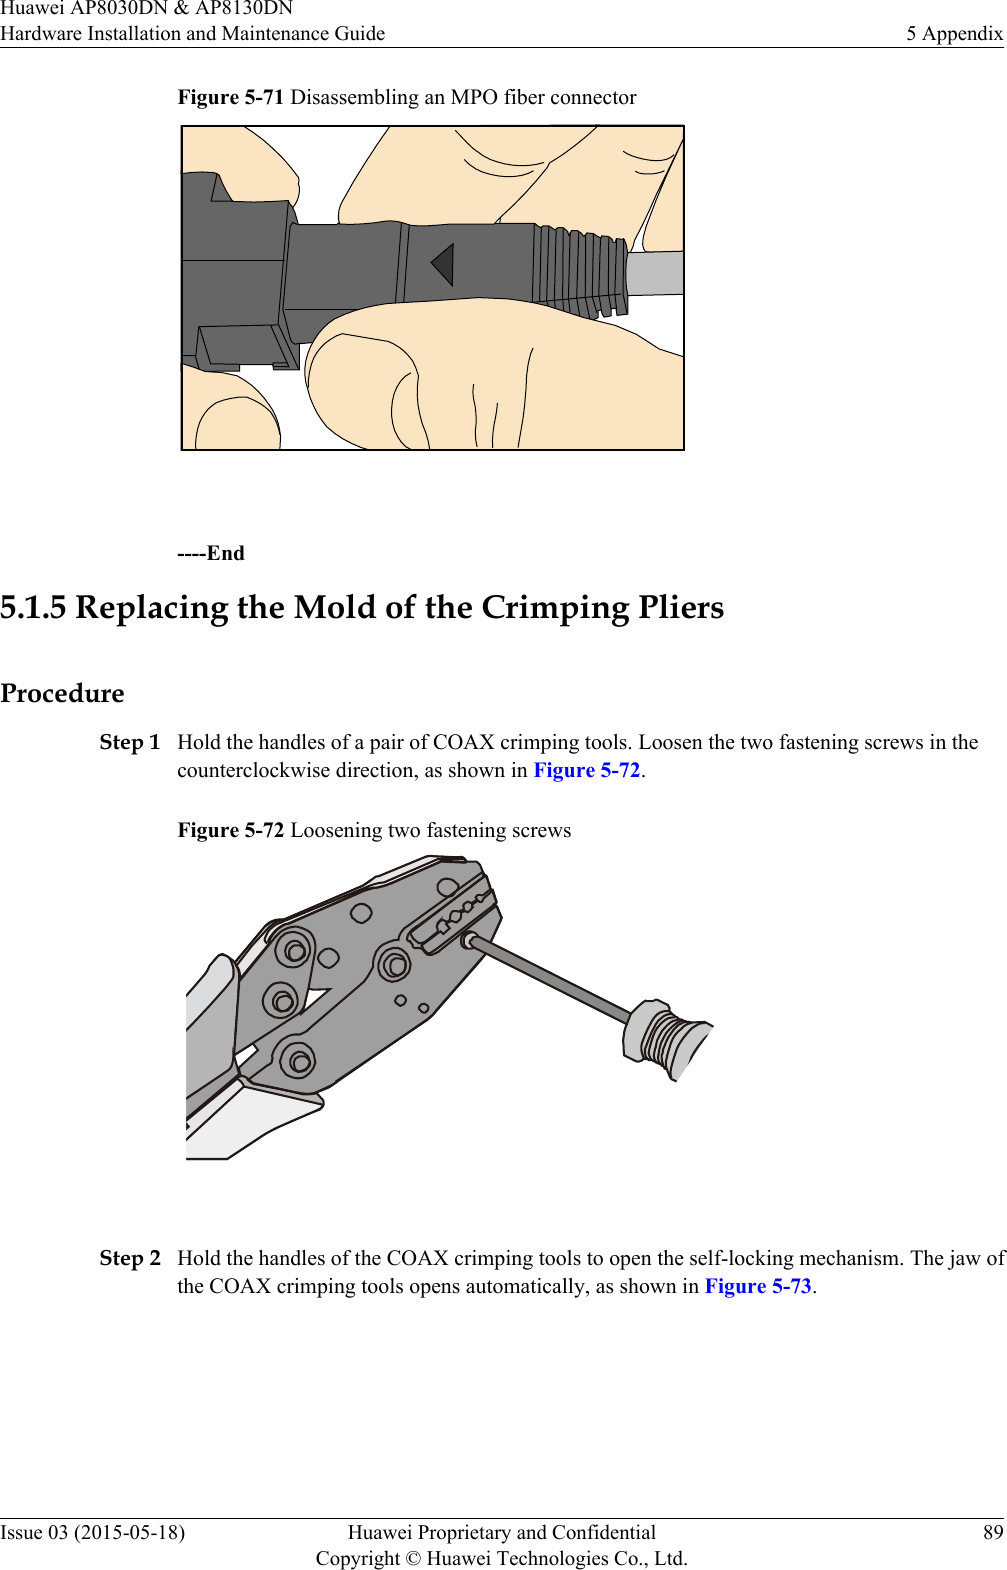 Figure 5-71 Disassembling an MPO fiber connector ----End5.1.5 Replacing the Mold of the Crimping PliersProcedureStep 1 Hold the handles of a pair of COAX crimping tools. Loosen the two fastening screws in thecounterclockwise direction, as shown in Figure 5-72.Figure 5-72 Loosening two fastening screws Step 2 Hold the handles of the COAX crimping tools to open the self-locking mechanism. The jaw ofthe COAX crimping tools opens automatically, as shown in Figure 5-73.Huawei AP8030DN &amp; AP8130DNHardware Installation and Maintenance Guide 5 AppendixIssue 03 (2015-05-18) Huawei Proprietary and ConfidentialCopyright © Huawei Technologies Co., Ltd.89